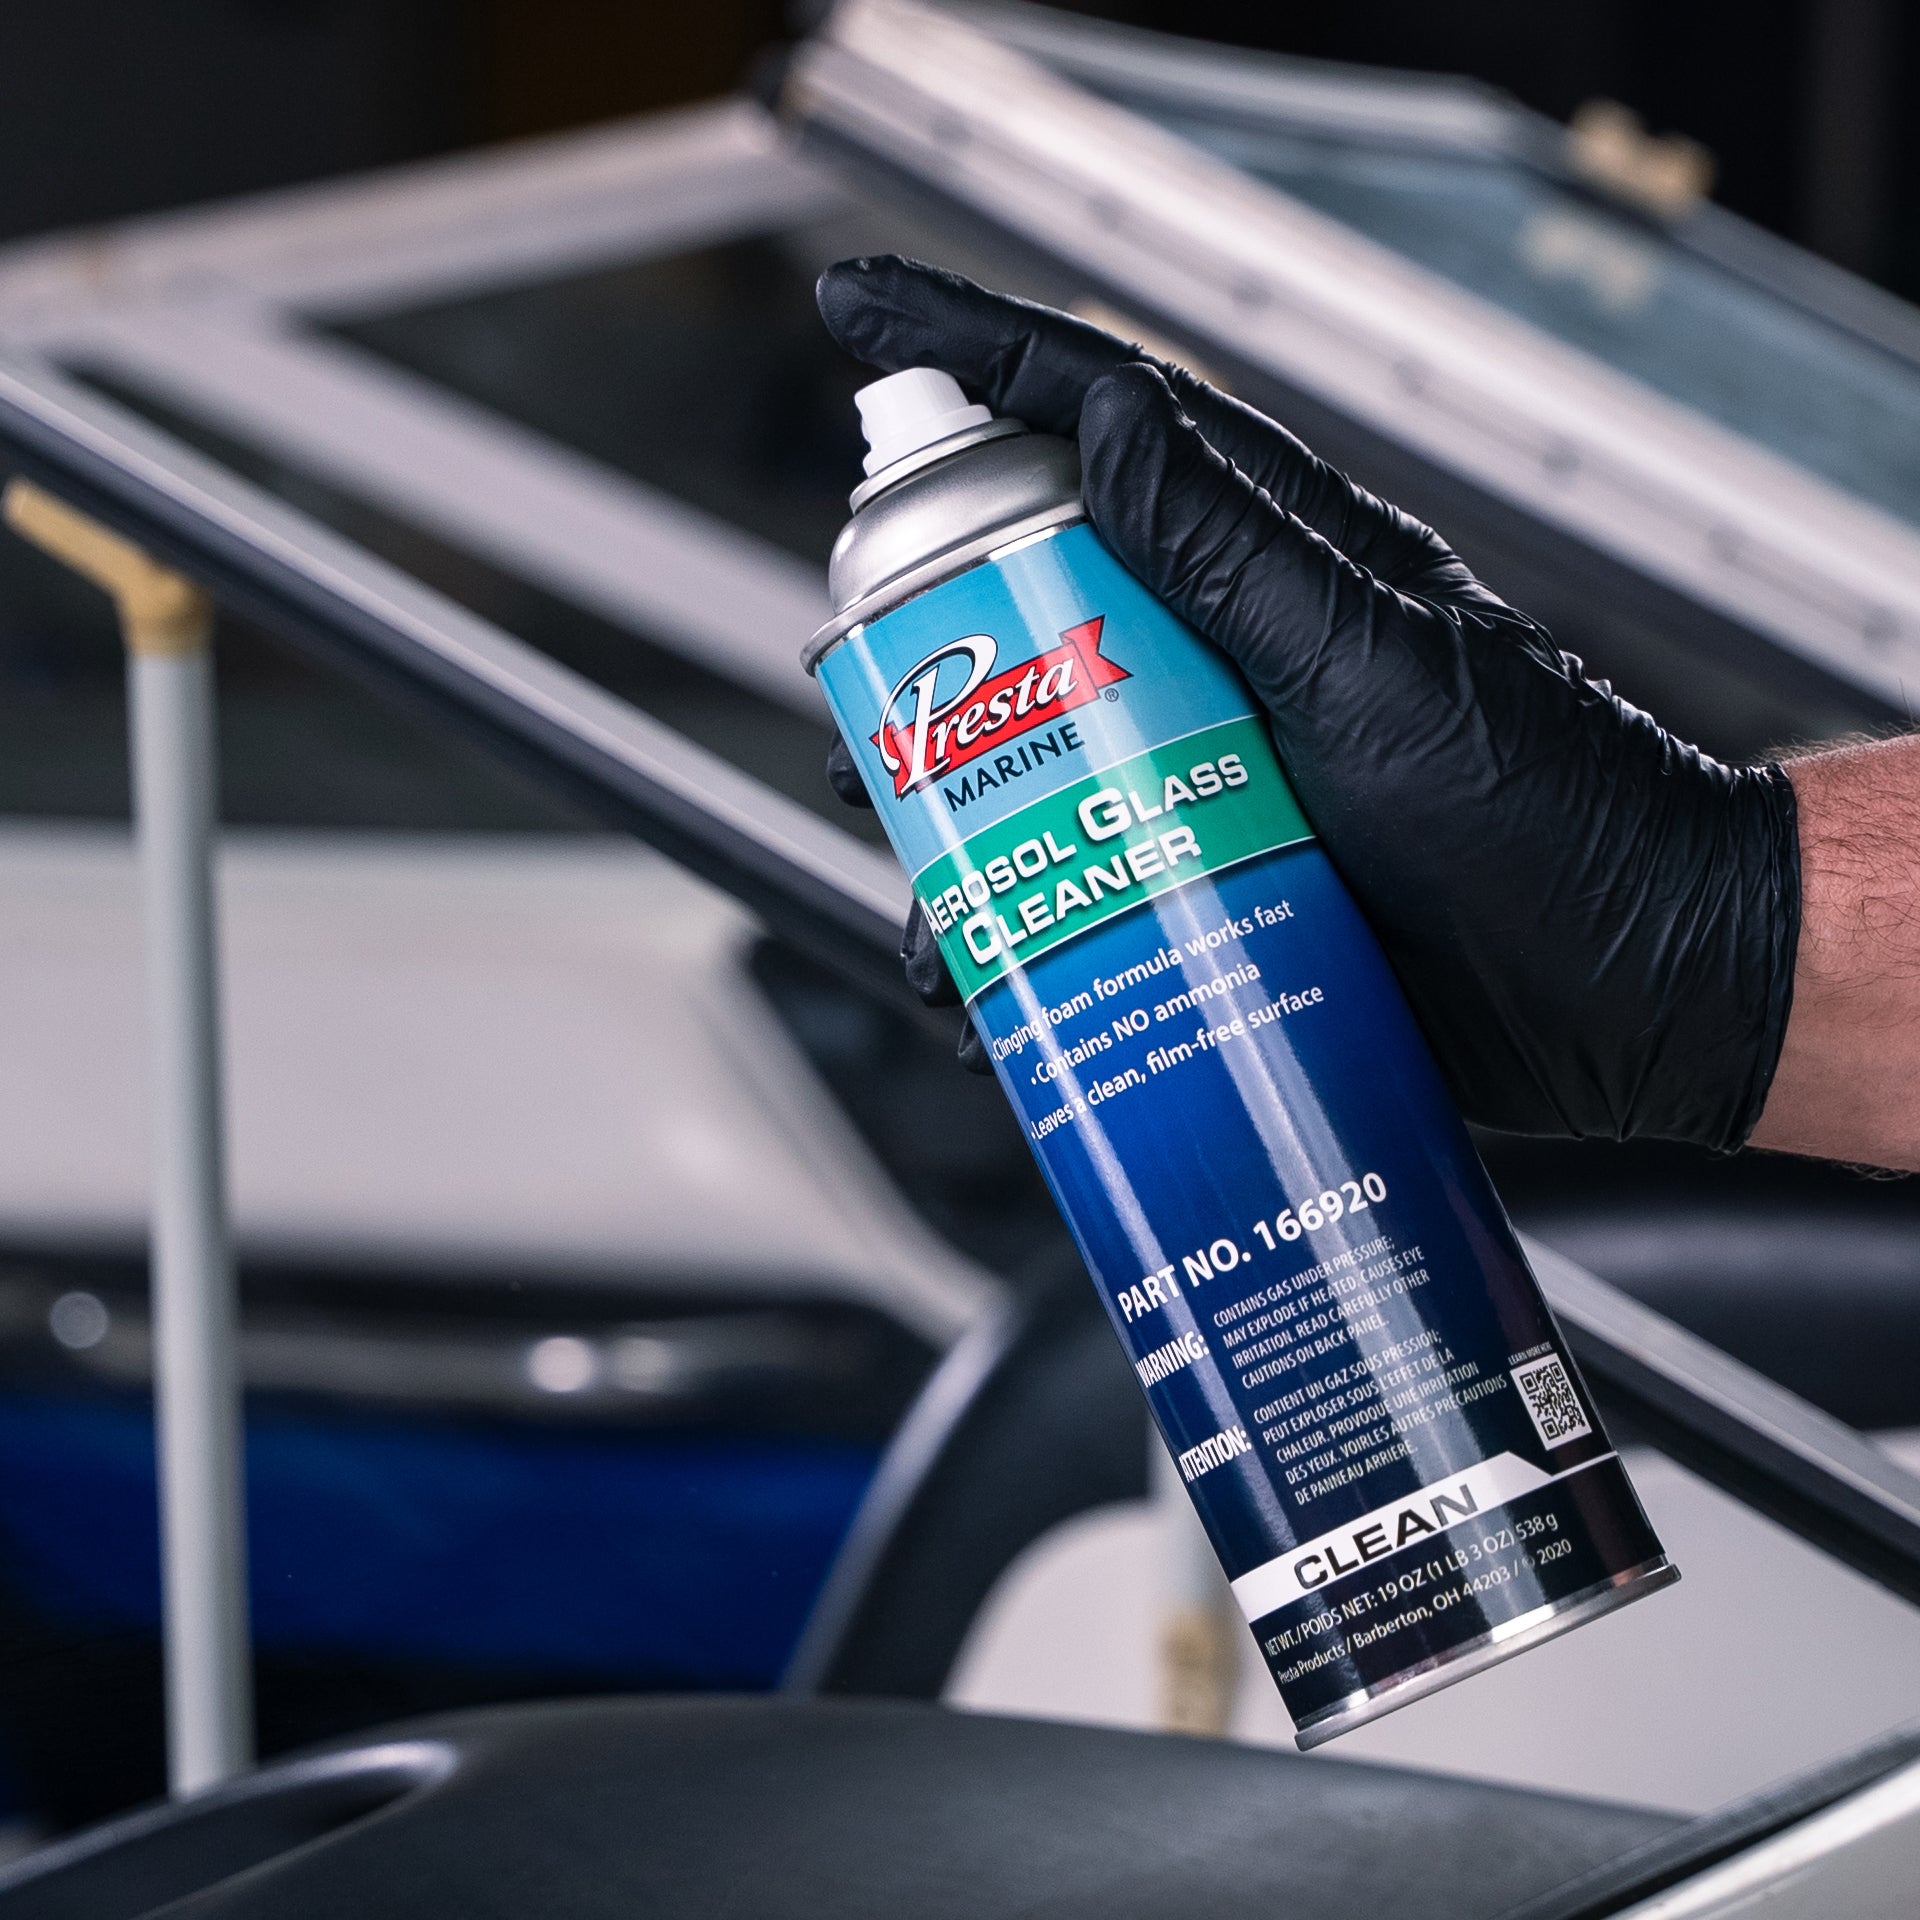 AMSOIL Launches 3 New Aerosol Cleaning Products For Automotive And